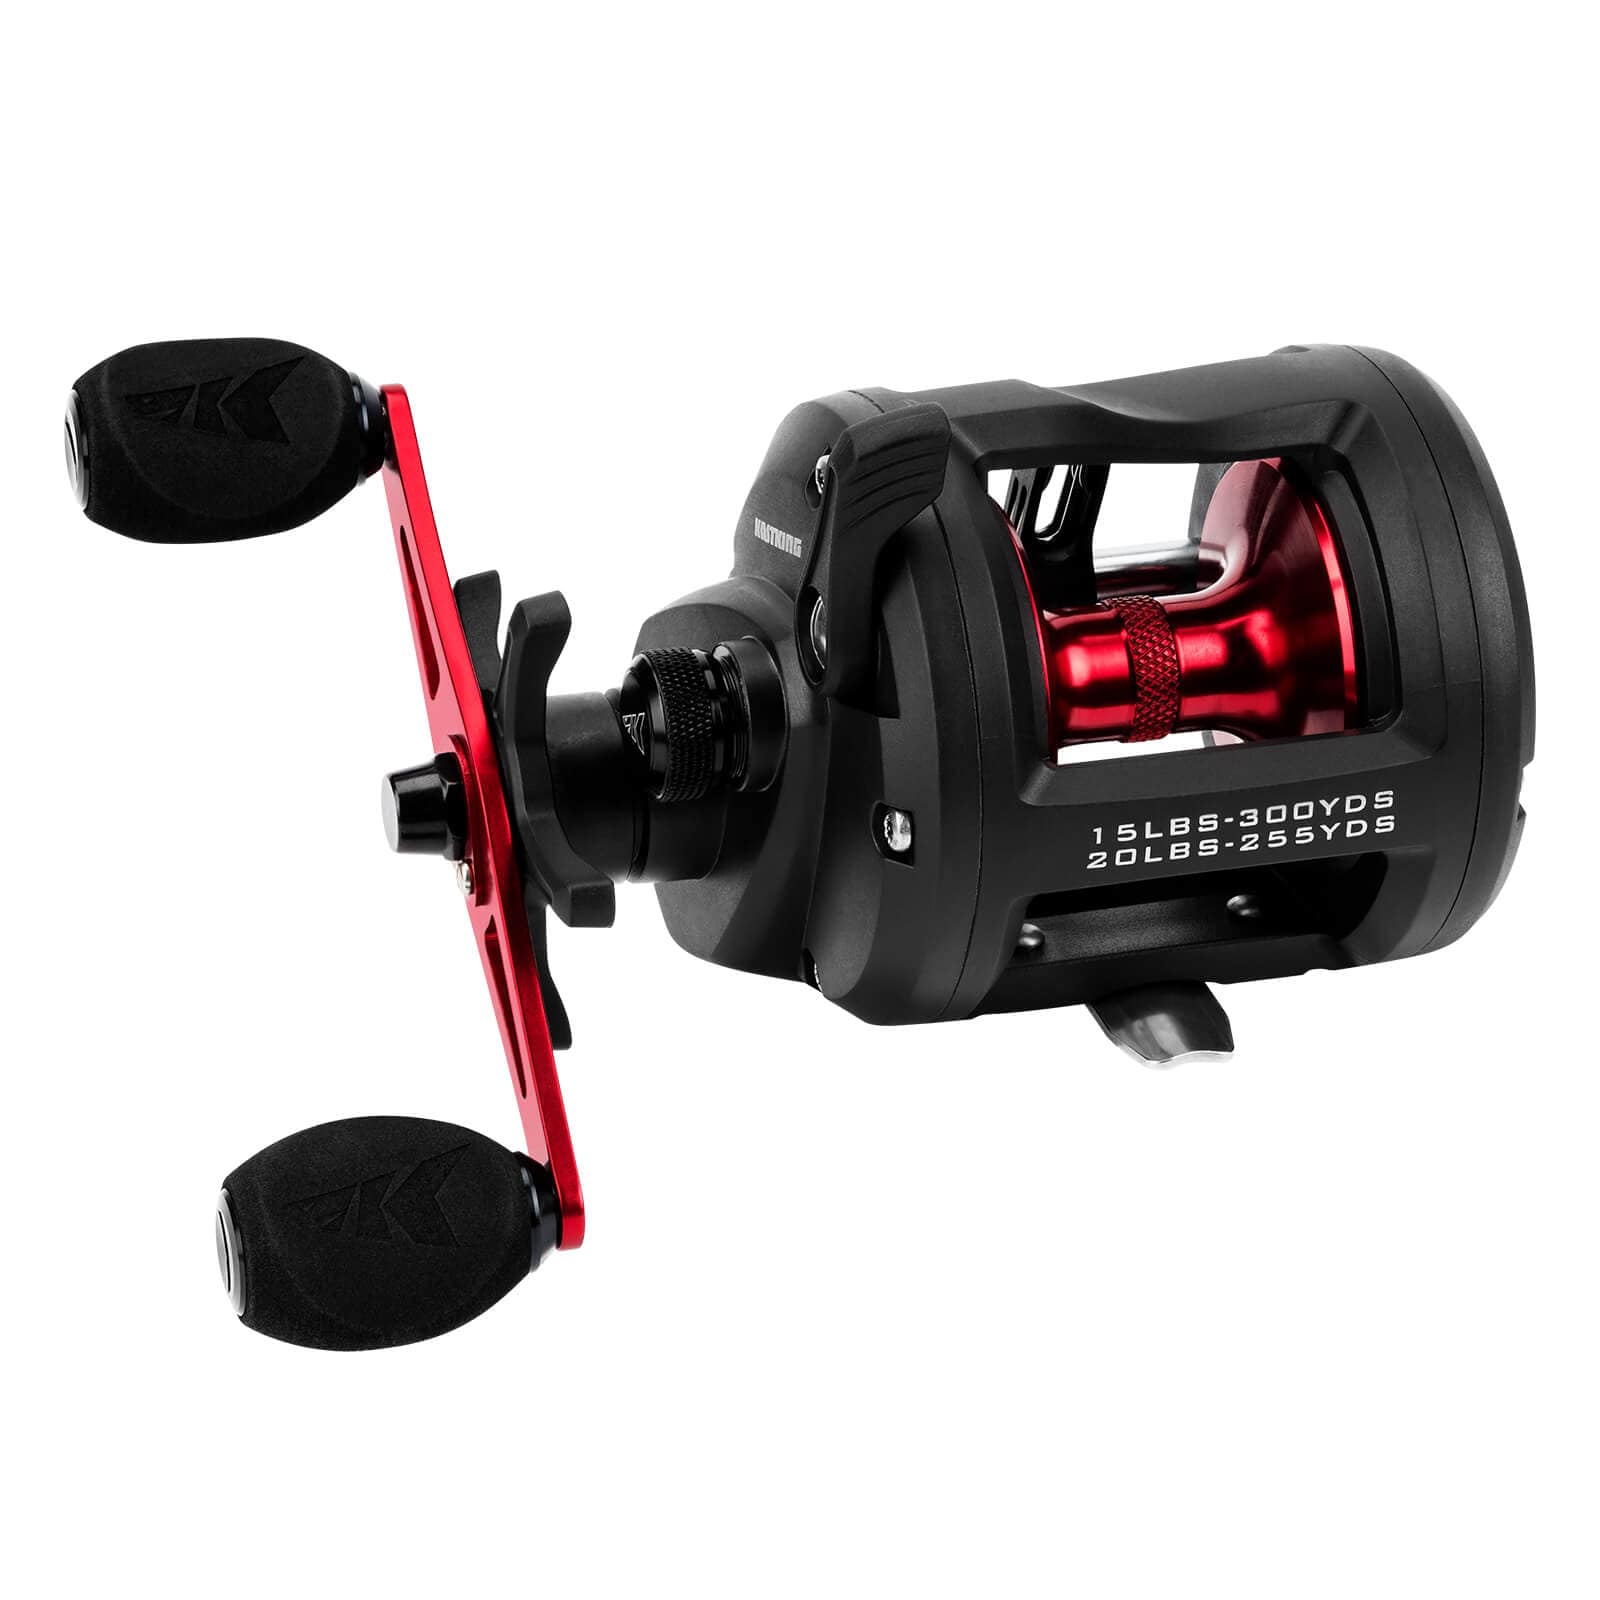 How to choose and use a trolling reel?